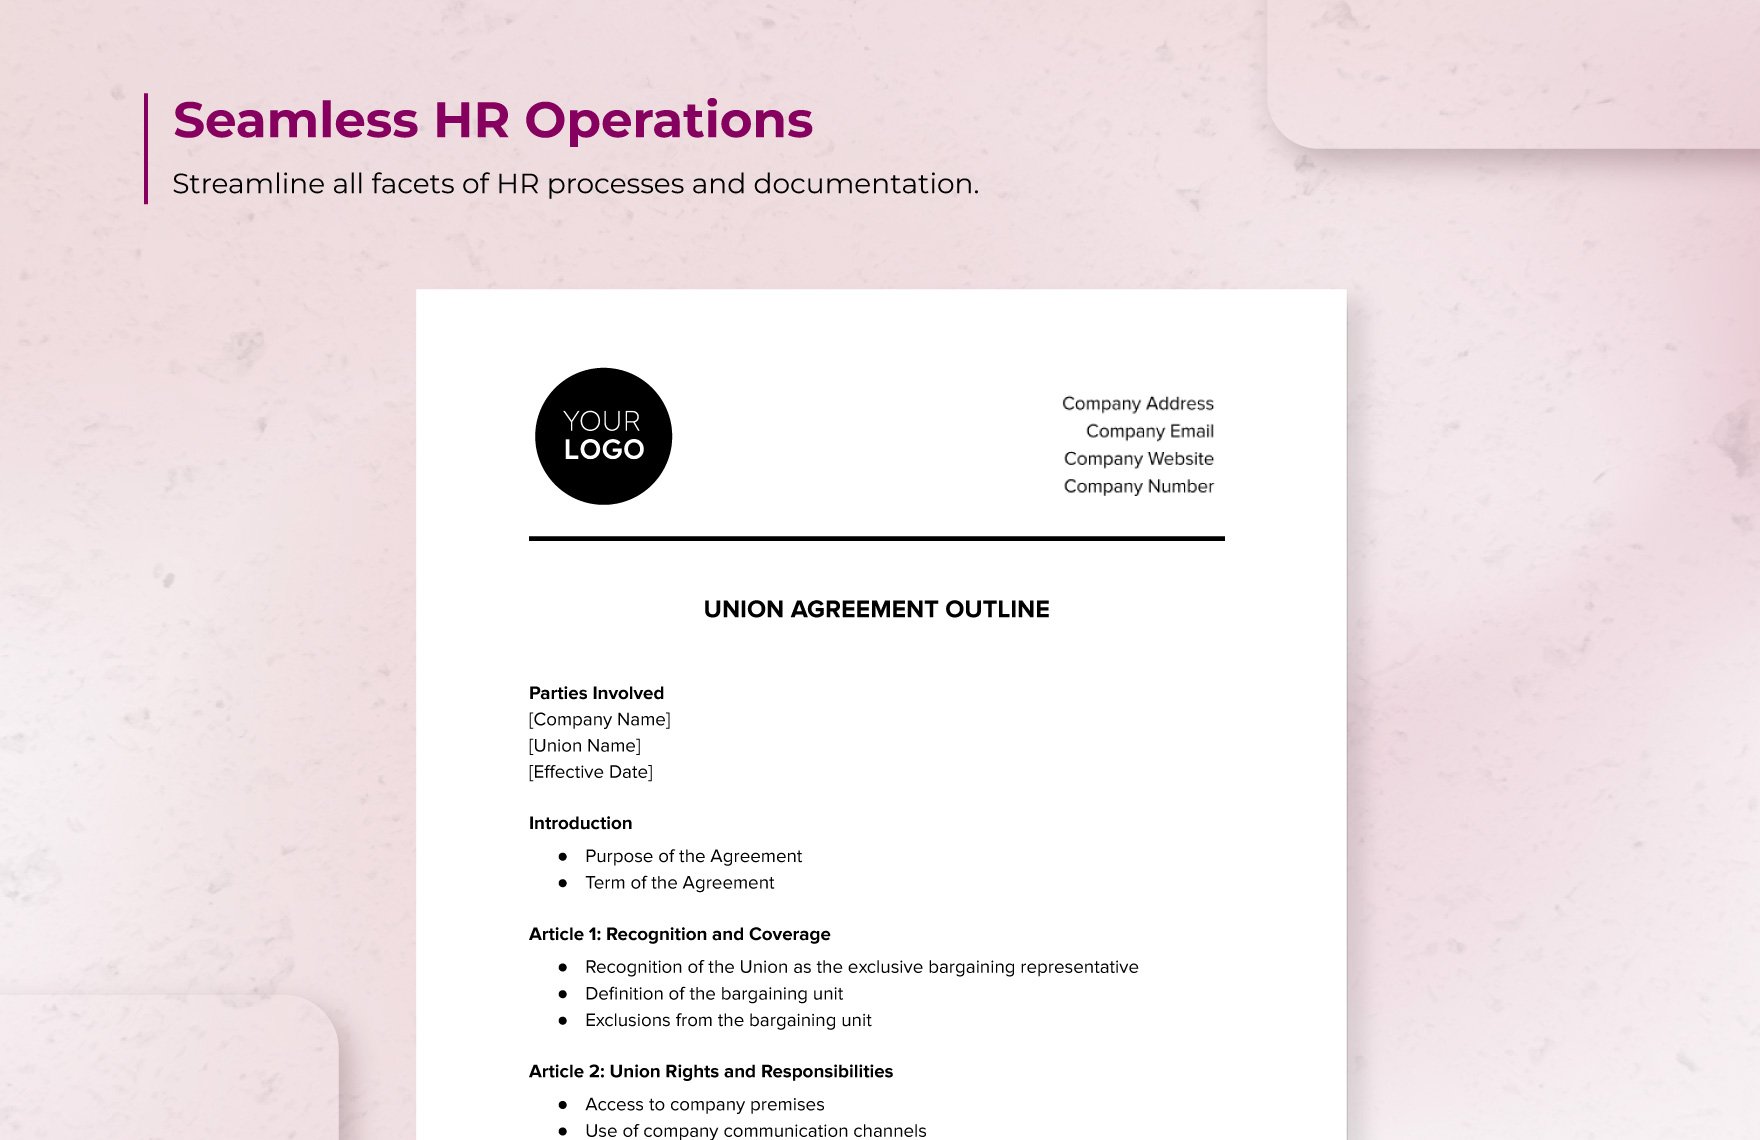 Union Agreement Outline HR Template